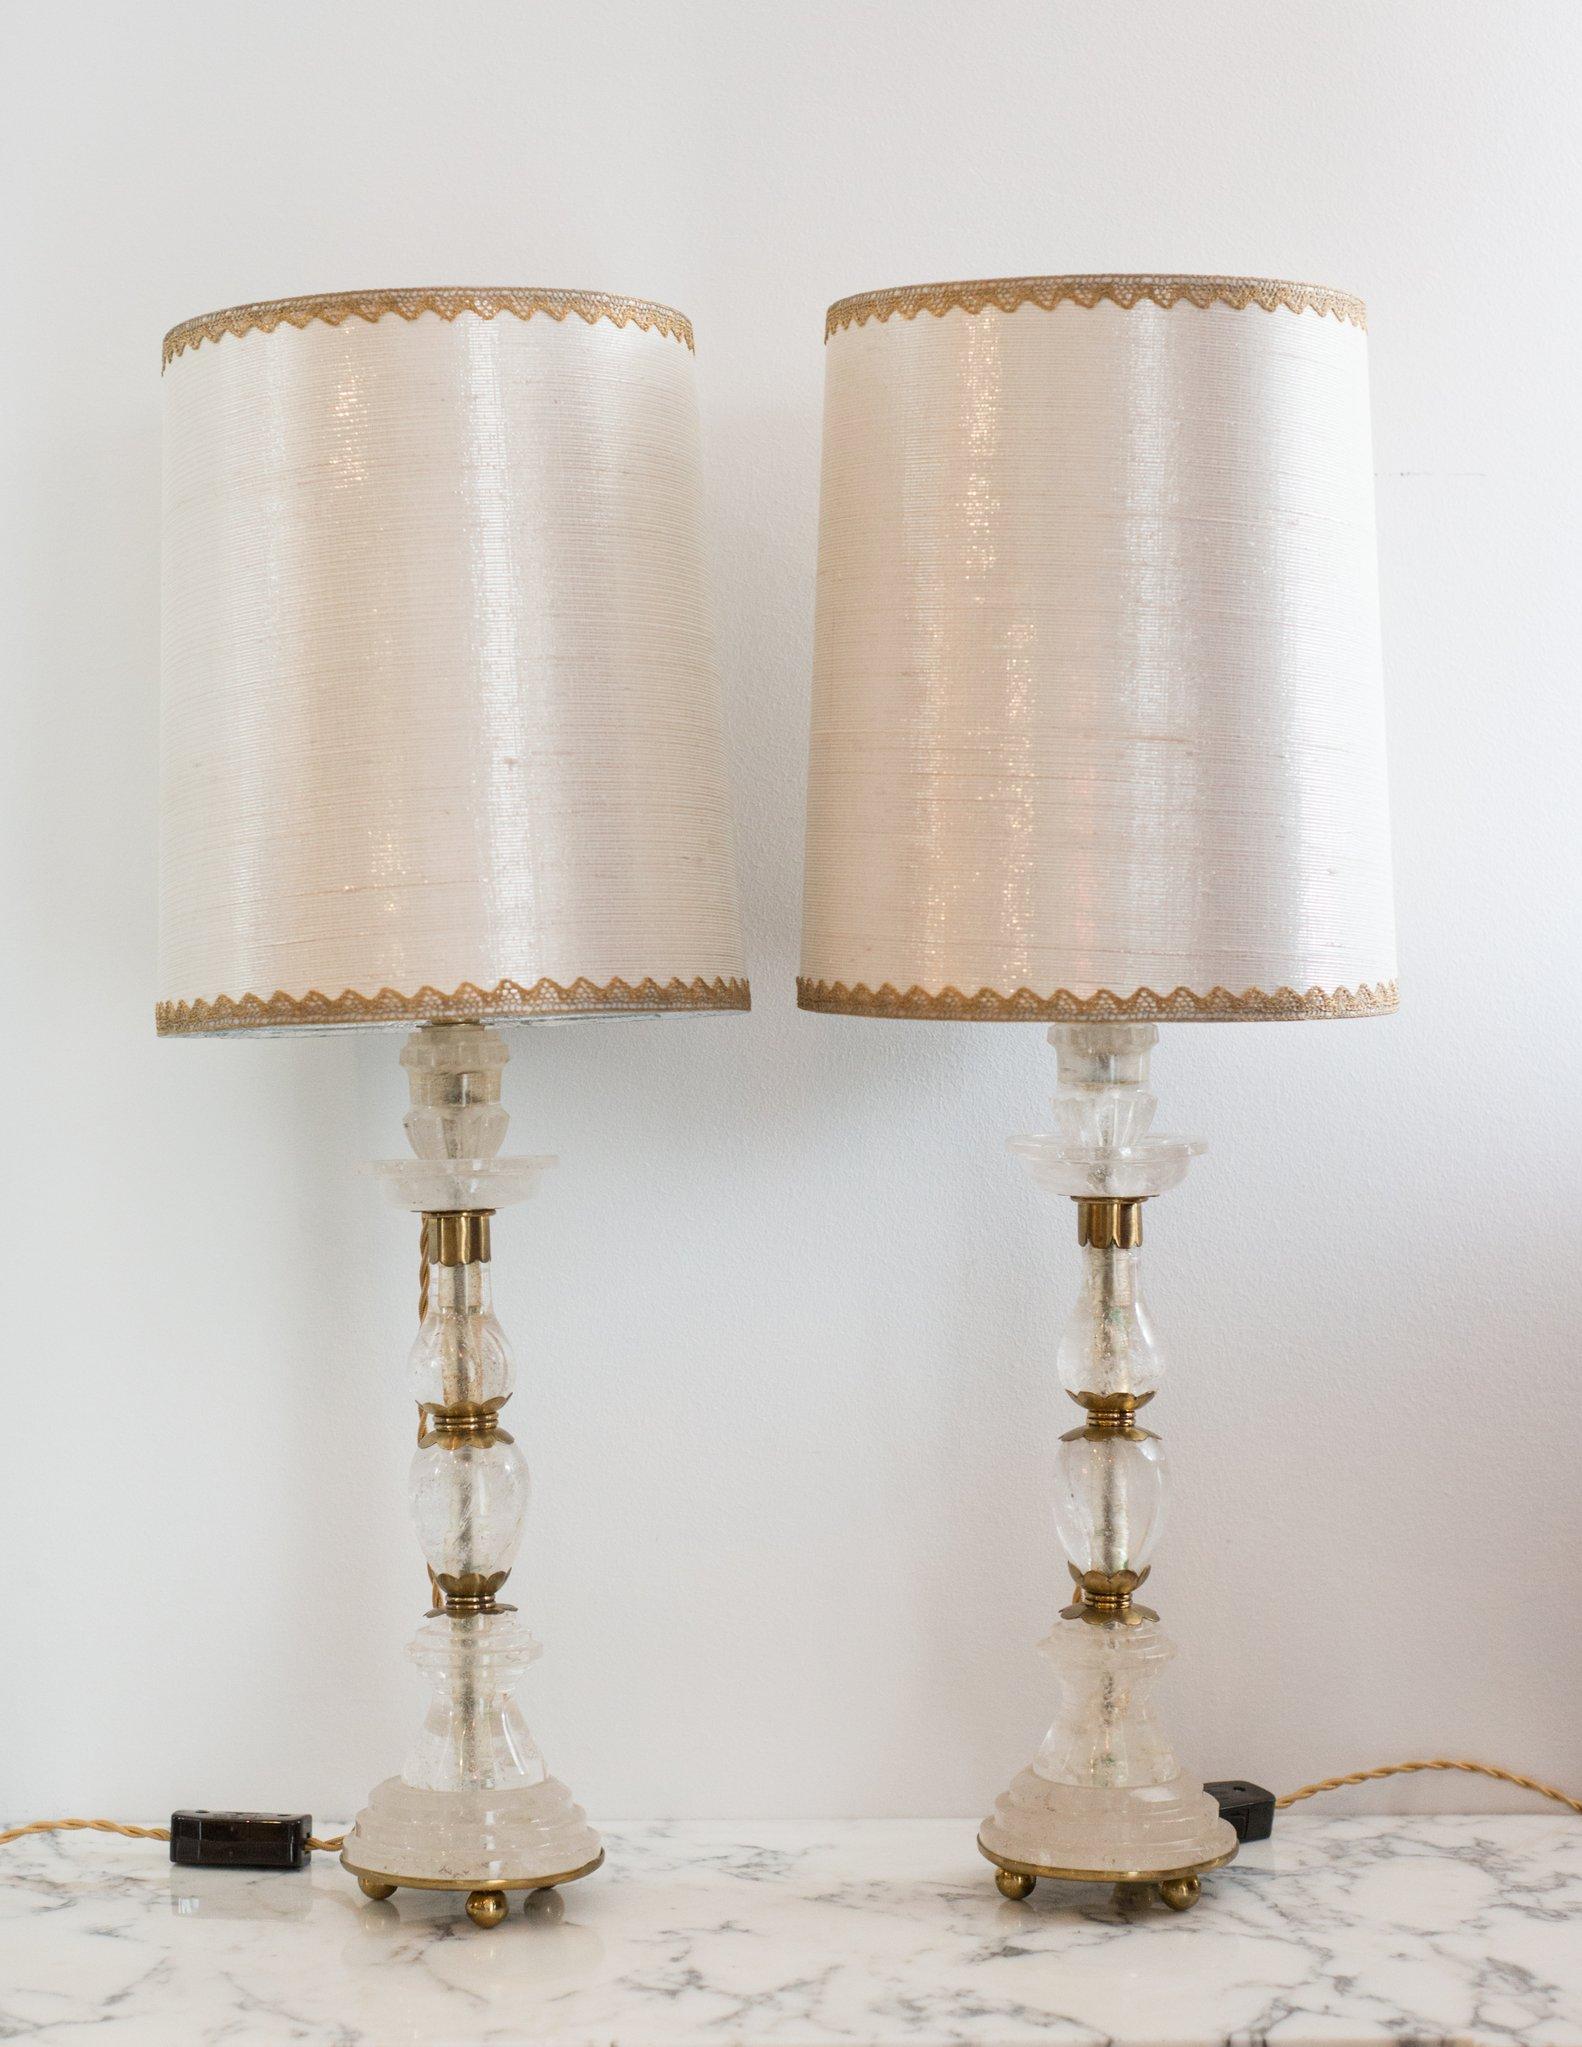 This pair of rock crystal and bronze lamps was sourced in Paris. Rock crystal has long been used in decoration and many ornate pieces are exhibited in museums around the world. The stunning shades are handcrafted from metallic silk with vintage gold